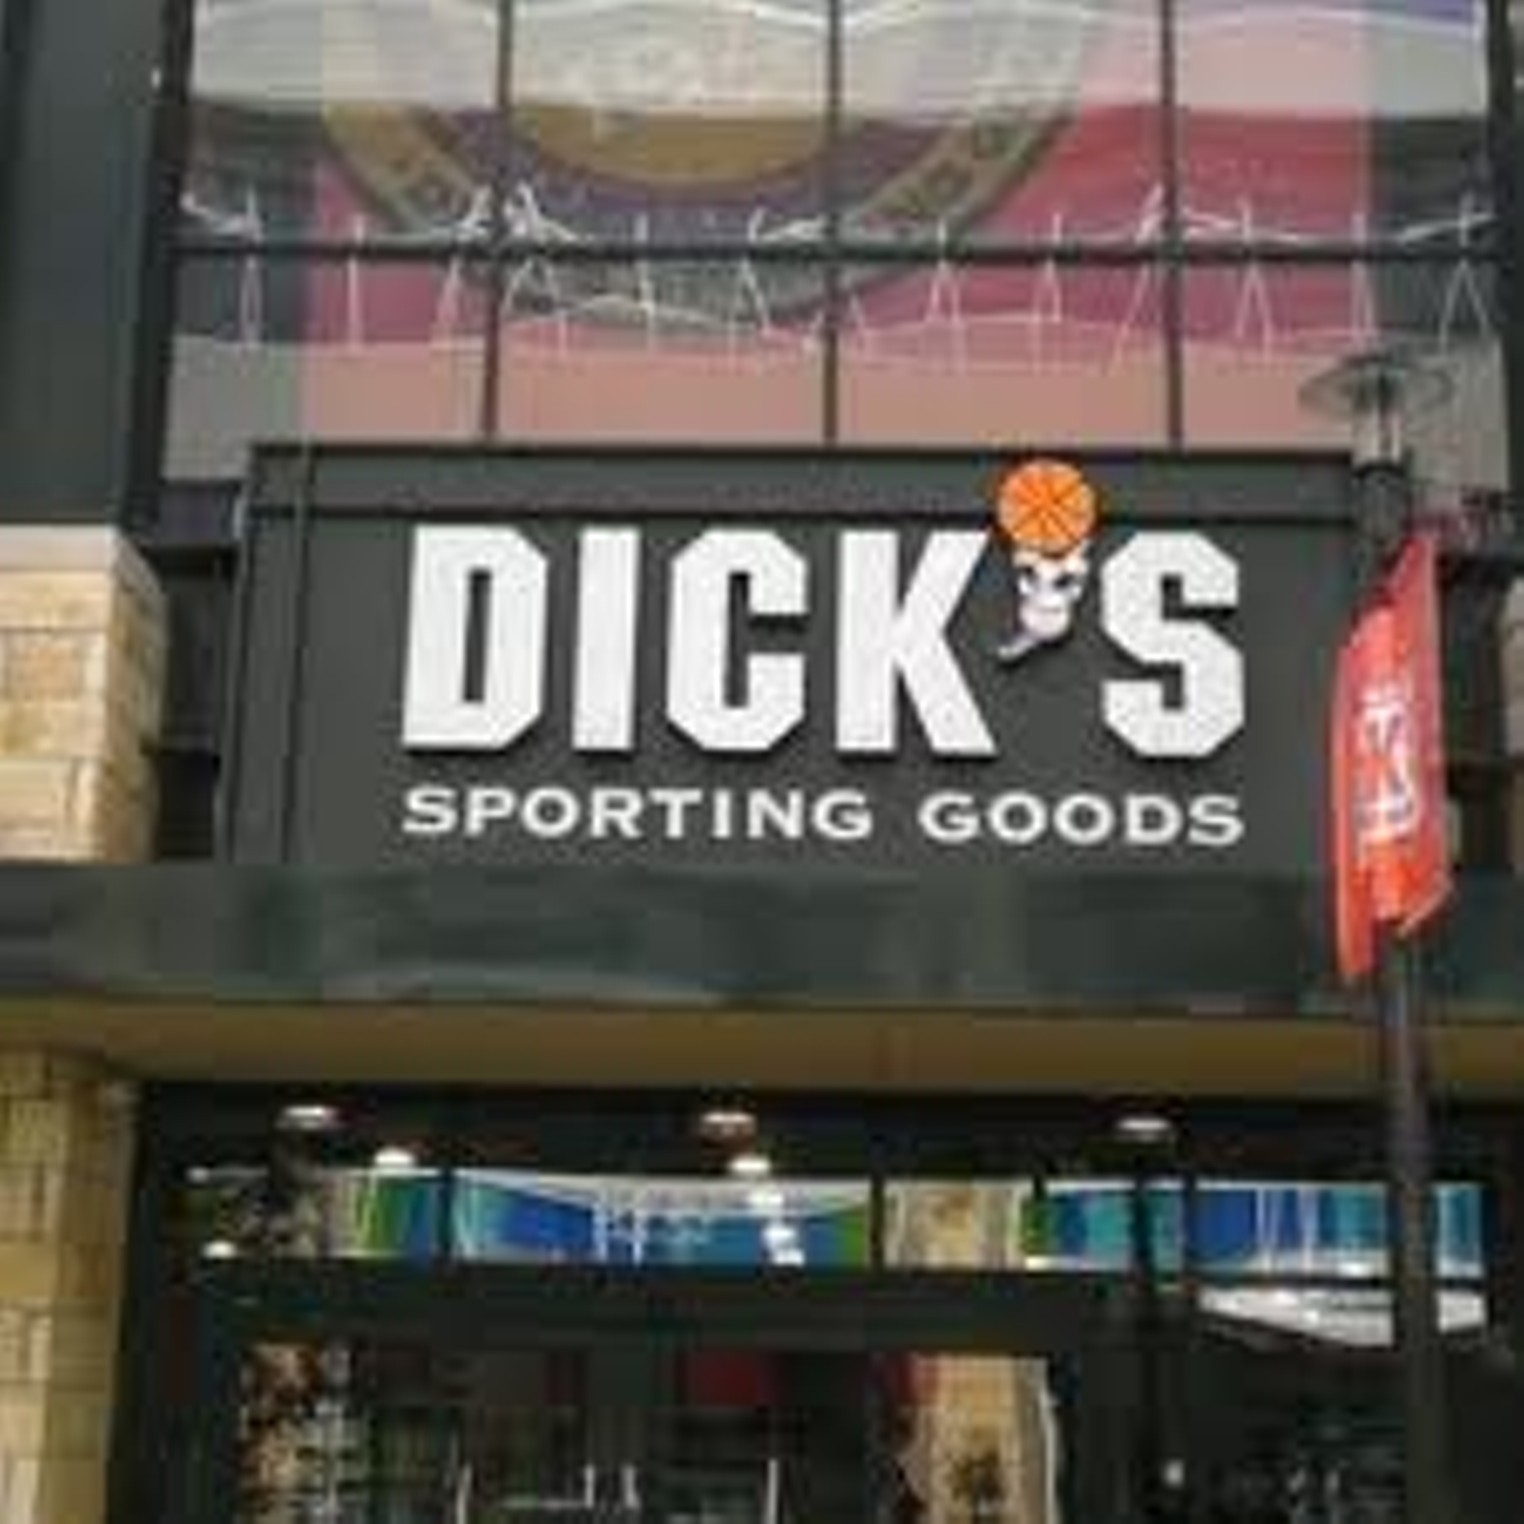 Dick's Sporting Goods planning to exit Shops at Park Lane in Dallas